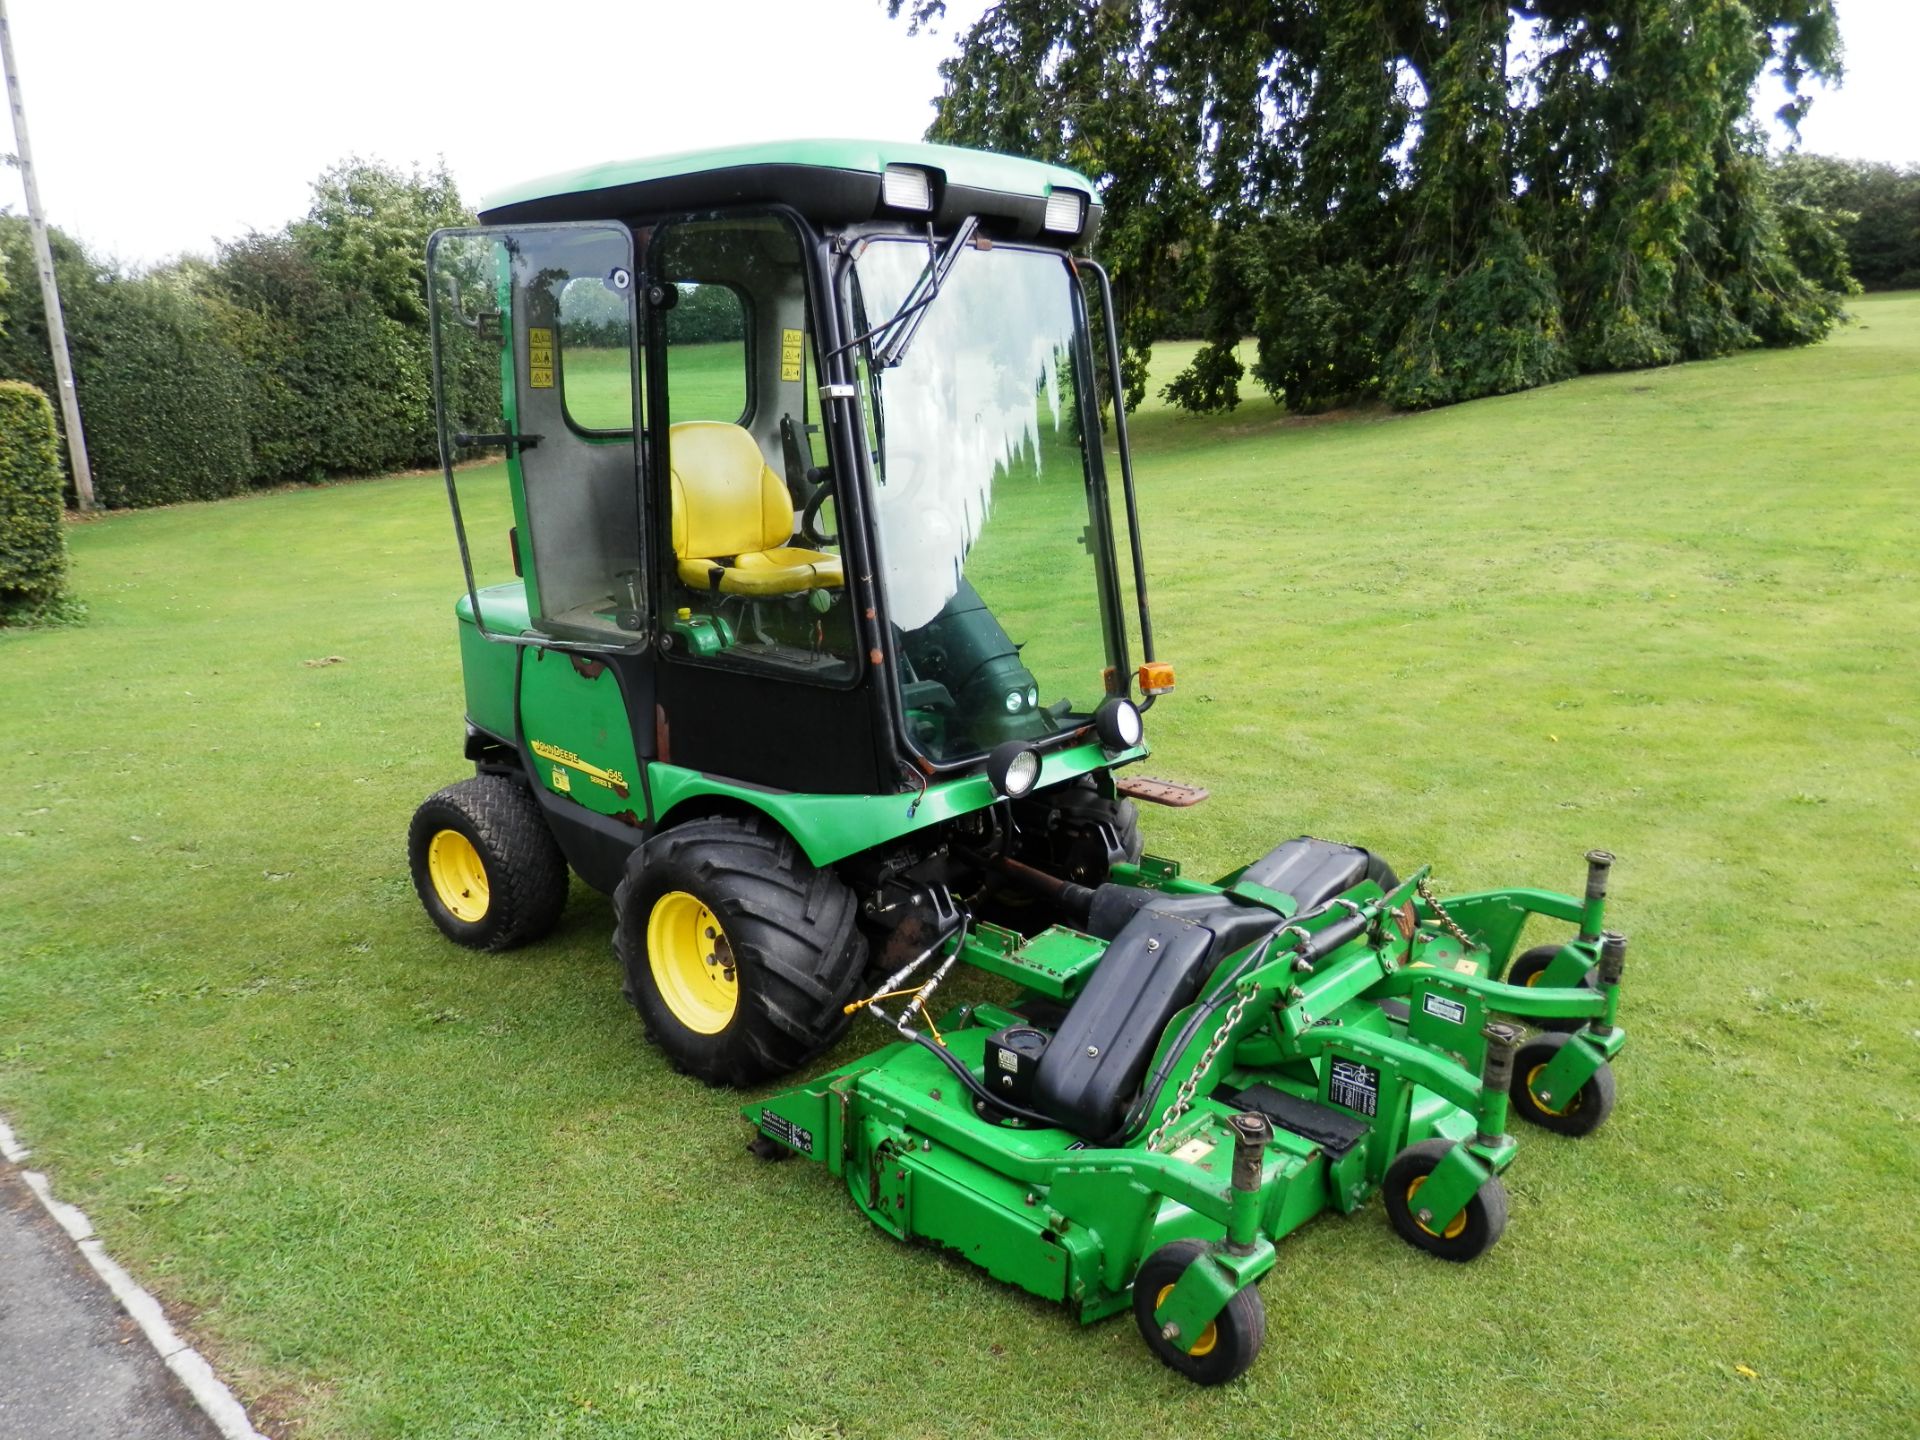 2006 JOHN DEERE 1545 SERIES 2 FRONT DECK 3 BLADE ROTARY MOWER, WIDE CUT AREA FOR LARGE ESTATES.